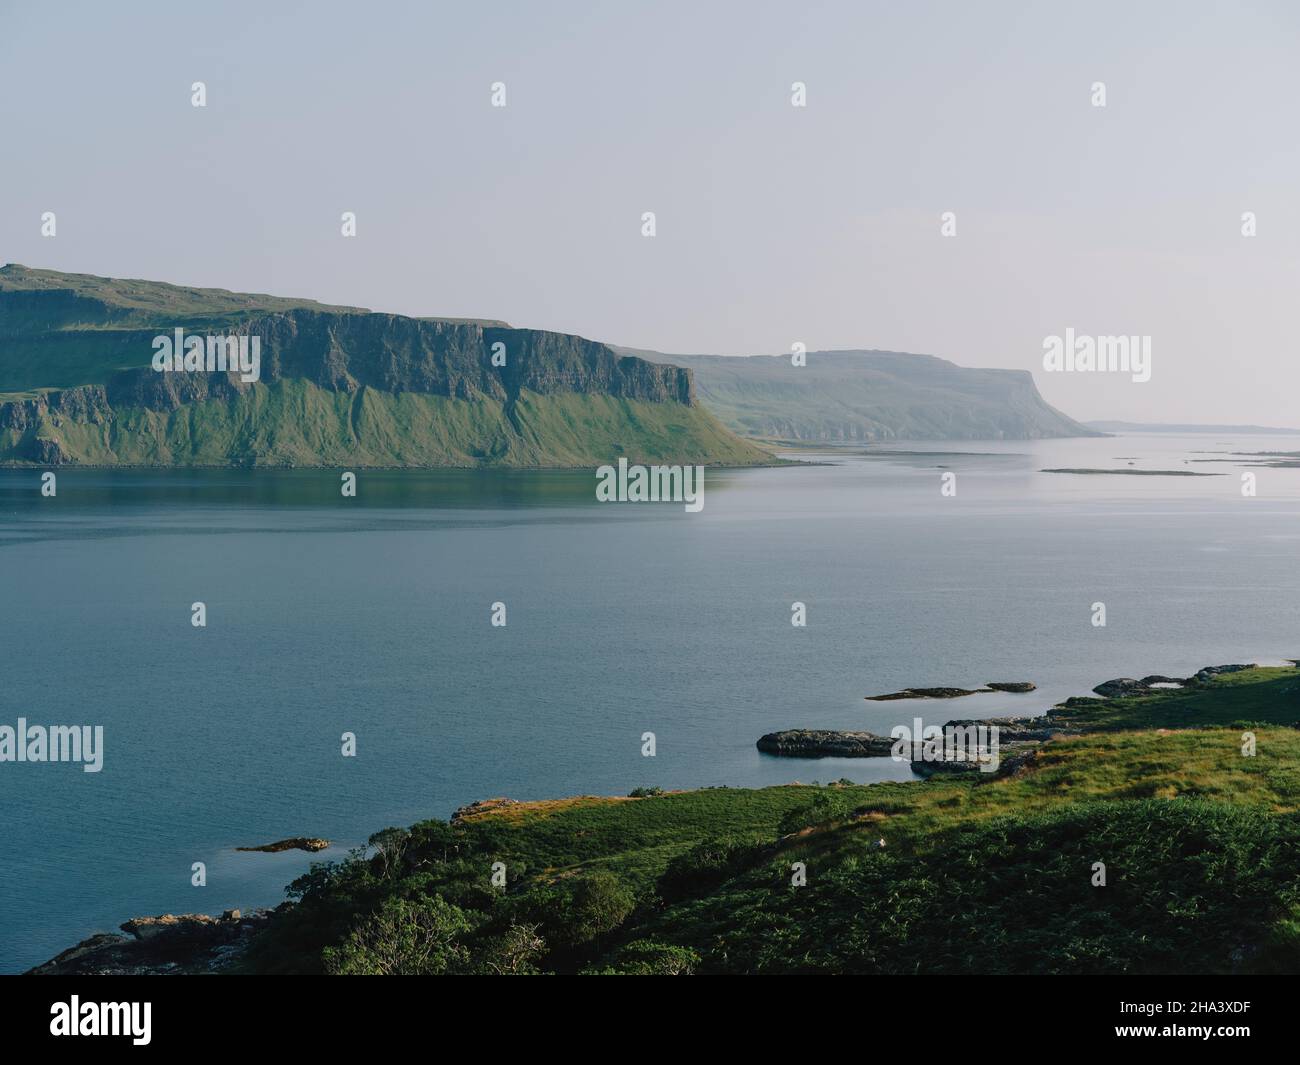 Looking south east across the green summer landscape of Loch Na Keal to Creag a Ghaill cliffs, Isle of Mull, Inner Hebrides, Argyll & Bute Scotland UK Stock Photo